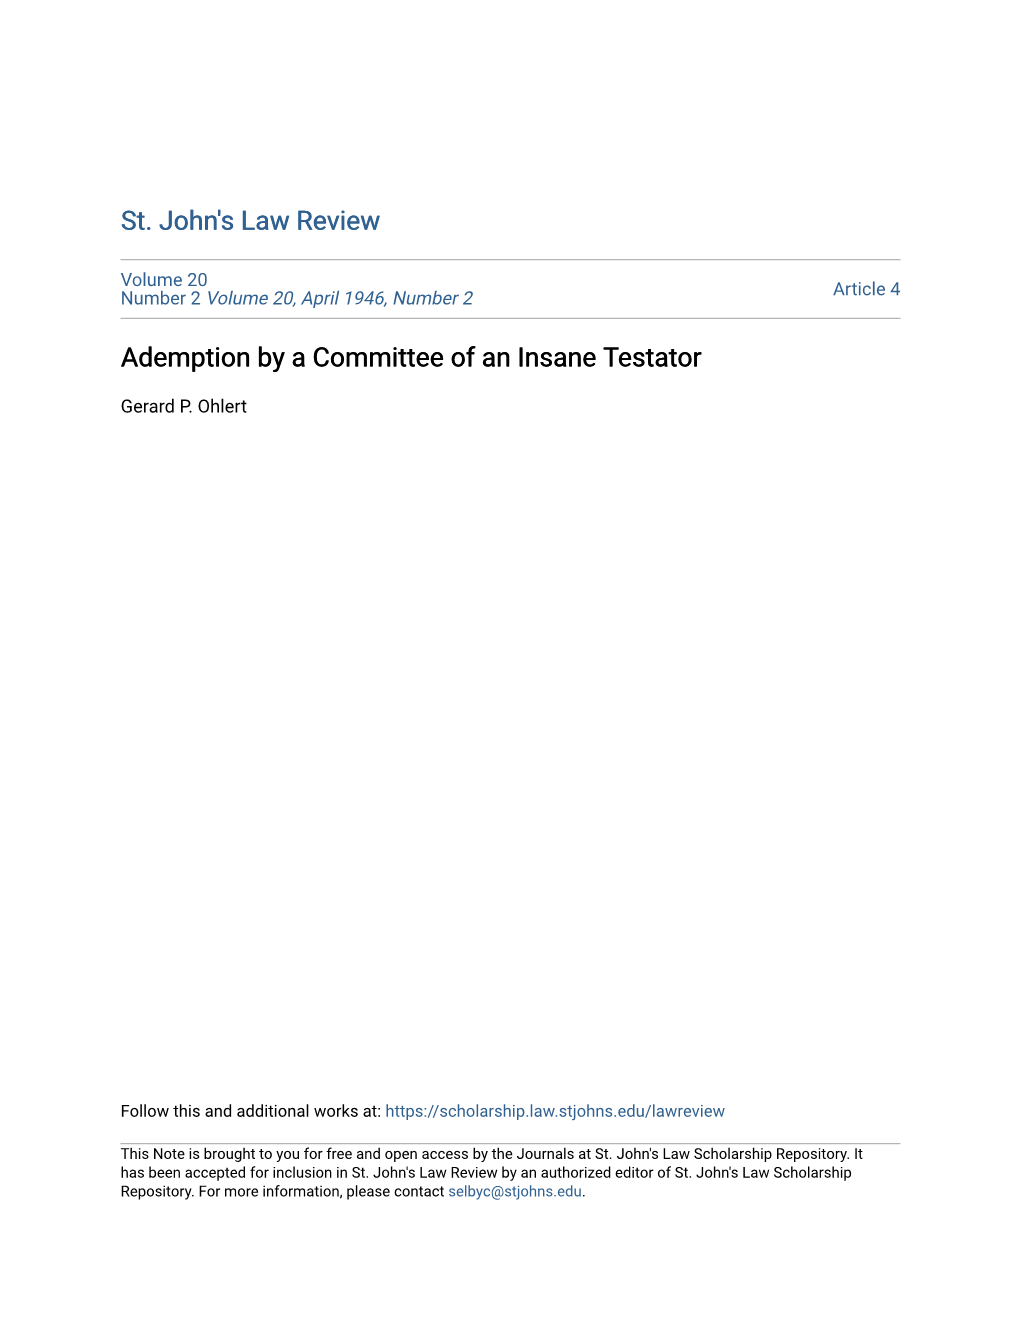 Ademption by a Committee of an Insane Testator